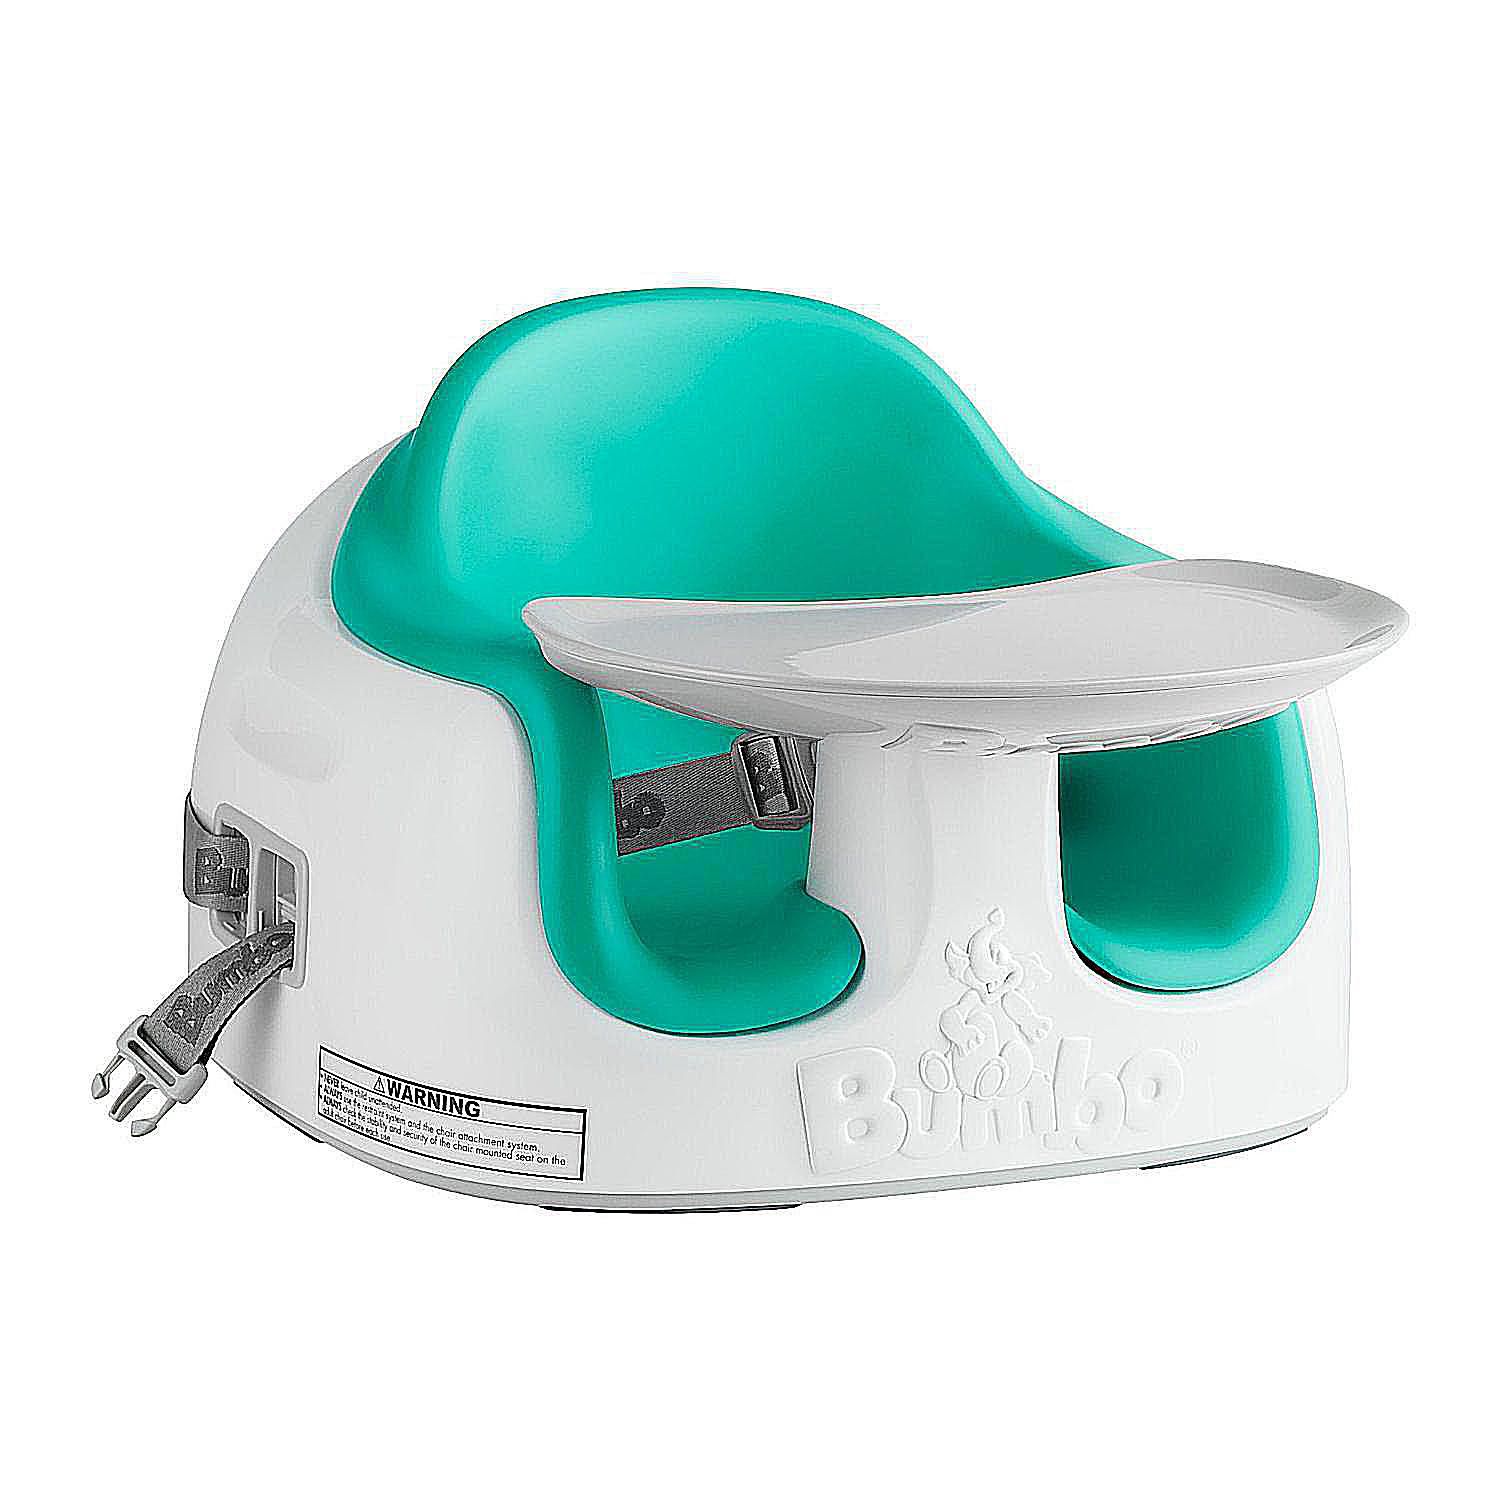 Is the Bumbo Seat Safe for Your Child?